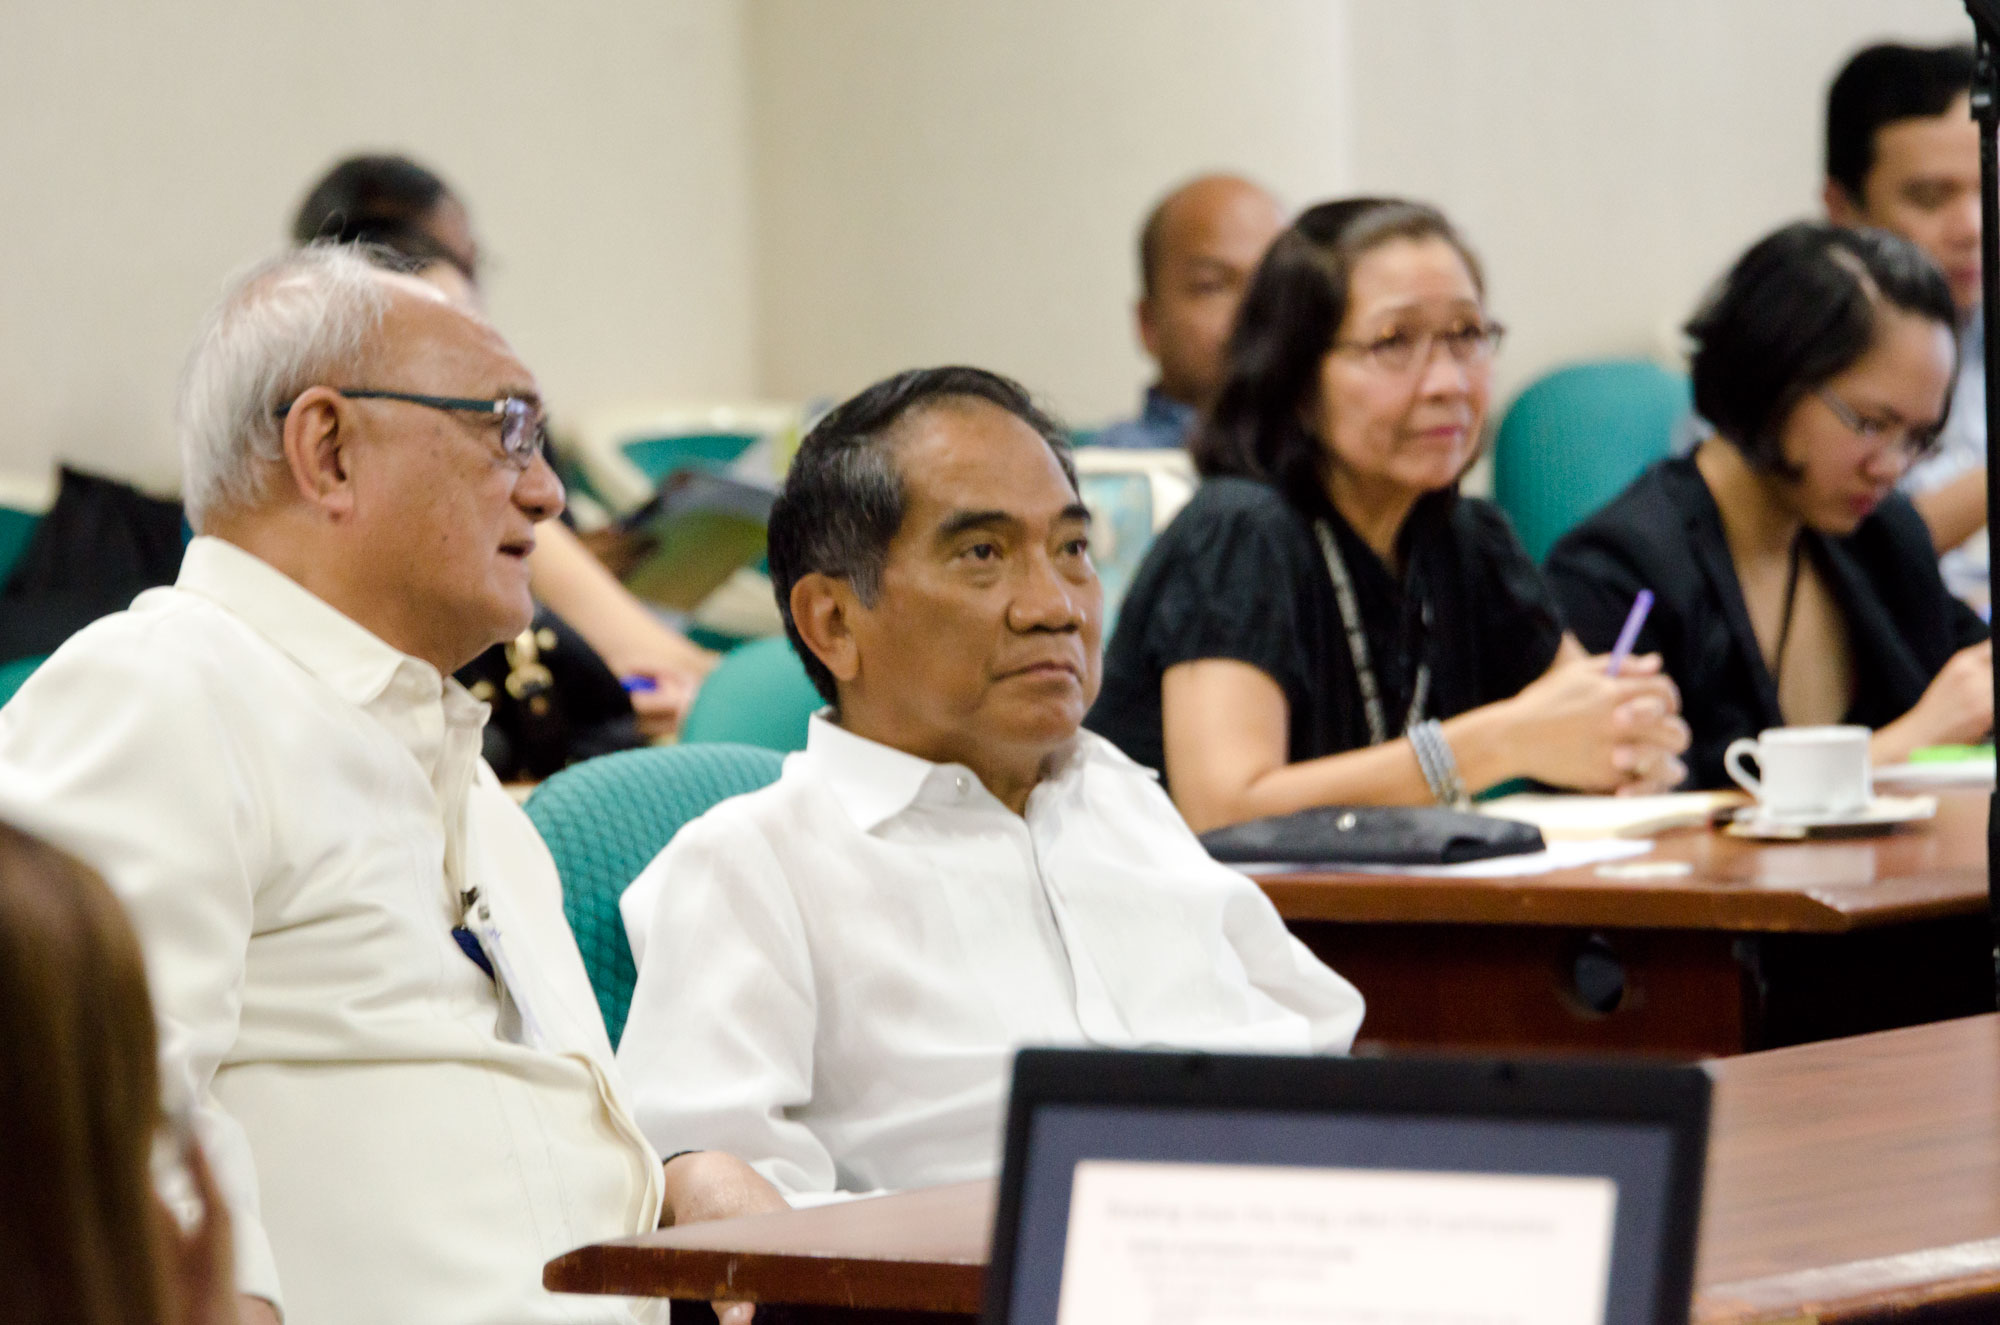 Senate Centennial Lecture Series Assessment Of The Bottom-Up Budgeting Process For FY 2015-GGM_7970.jpg